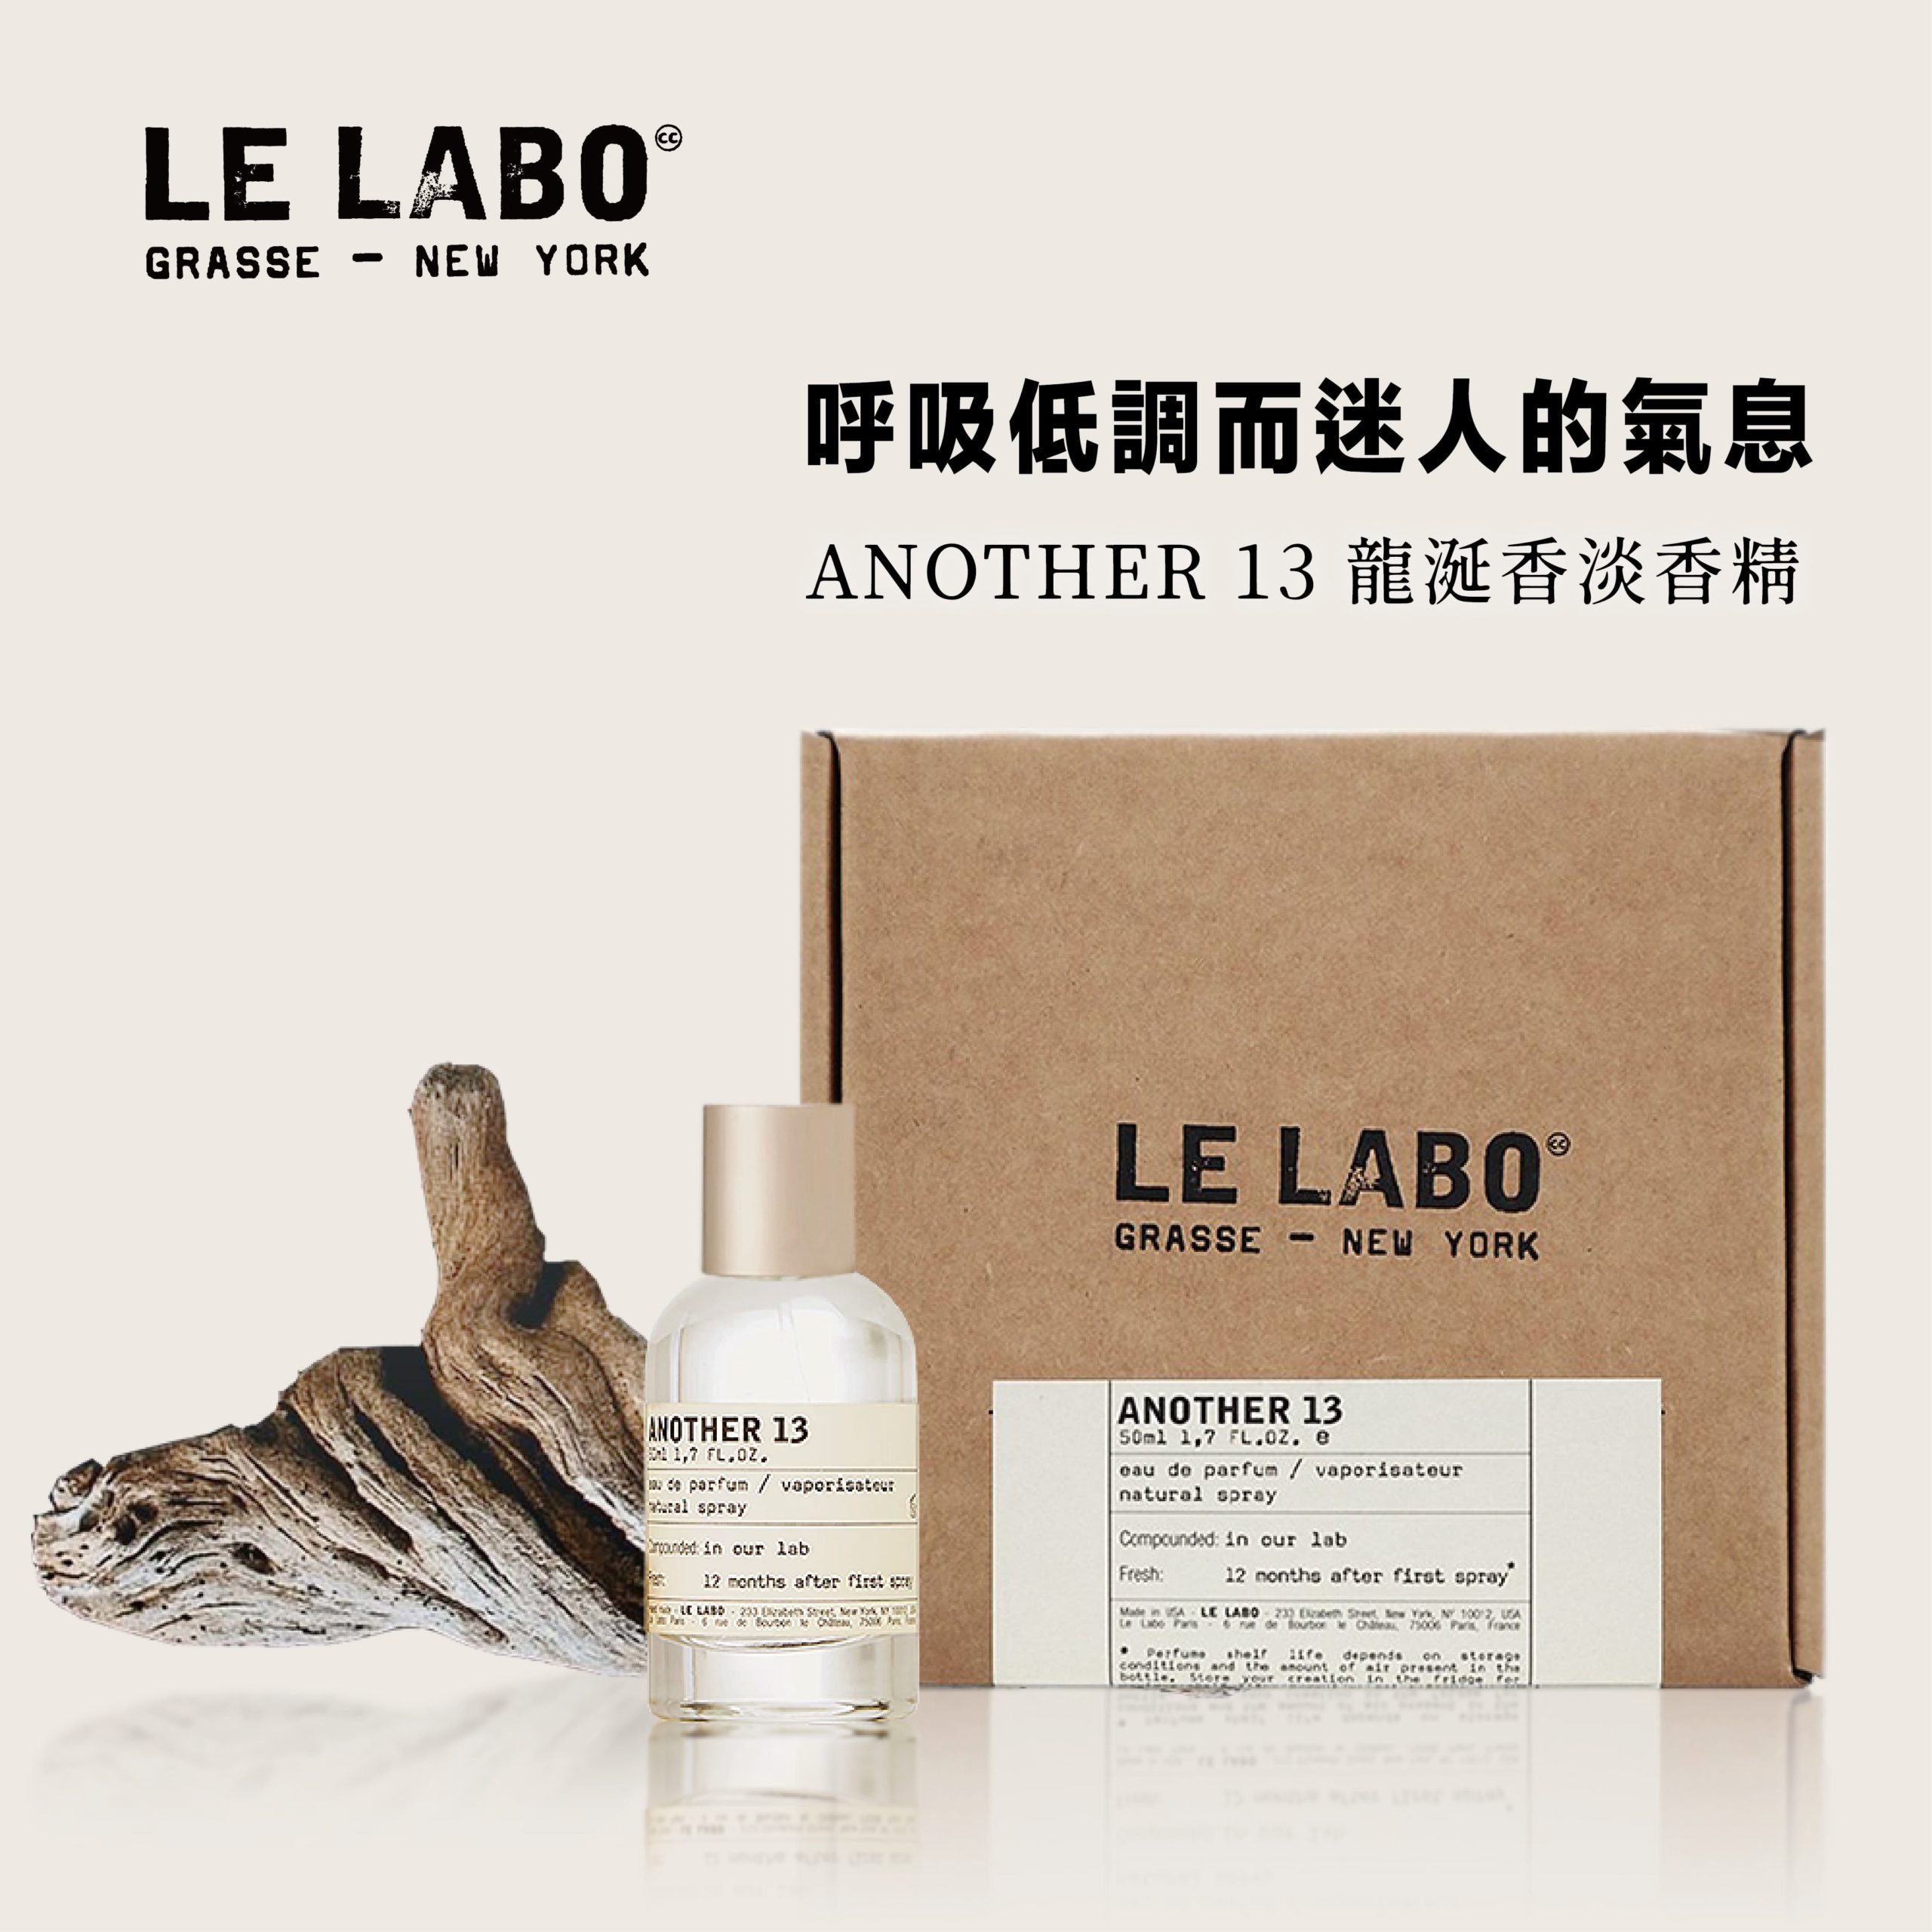 LE LABO ANOTHER13 50ml 直営店で先週購入 - ユニセックス